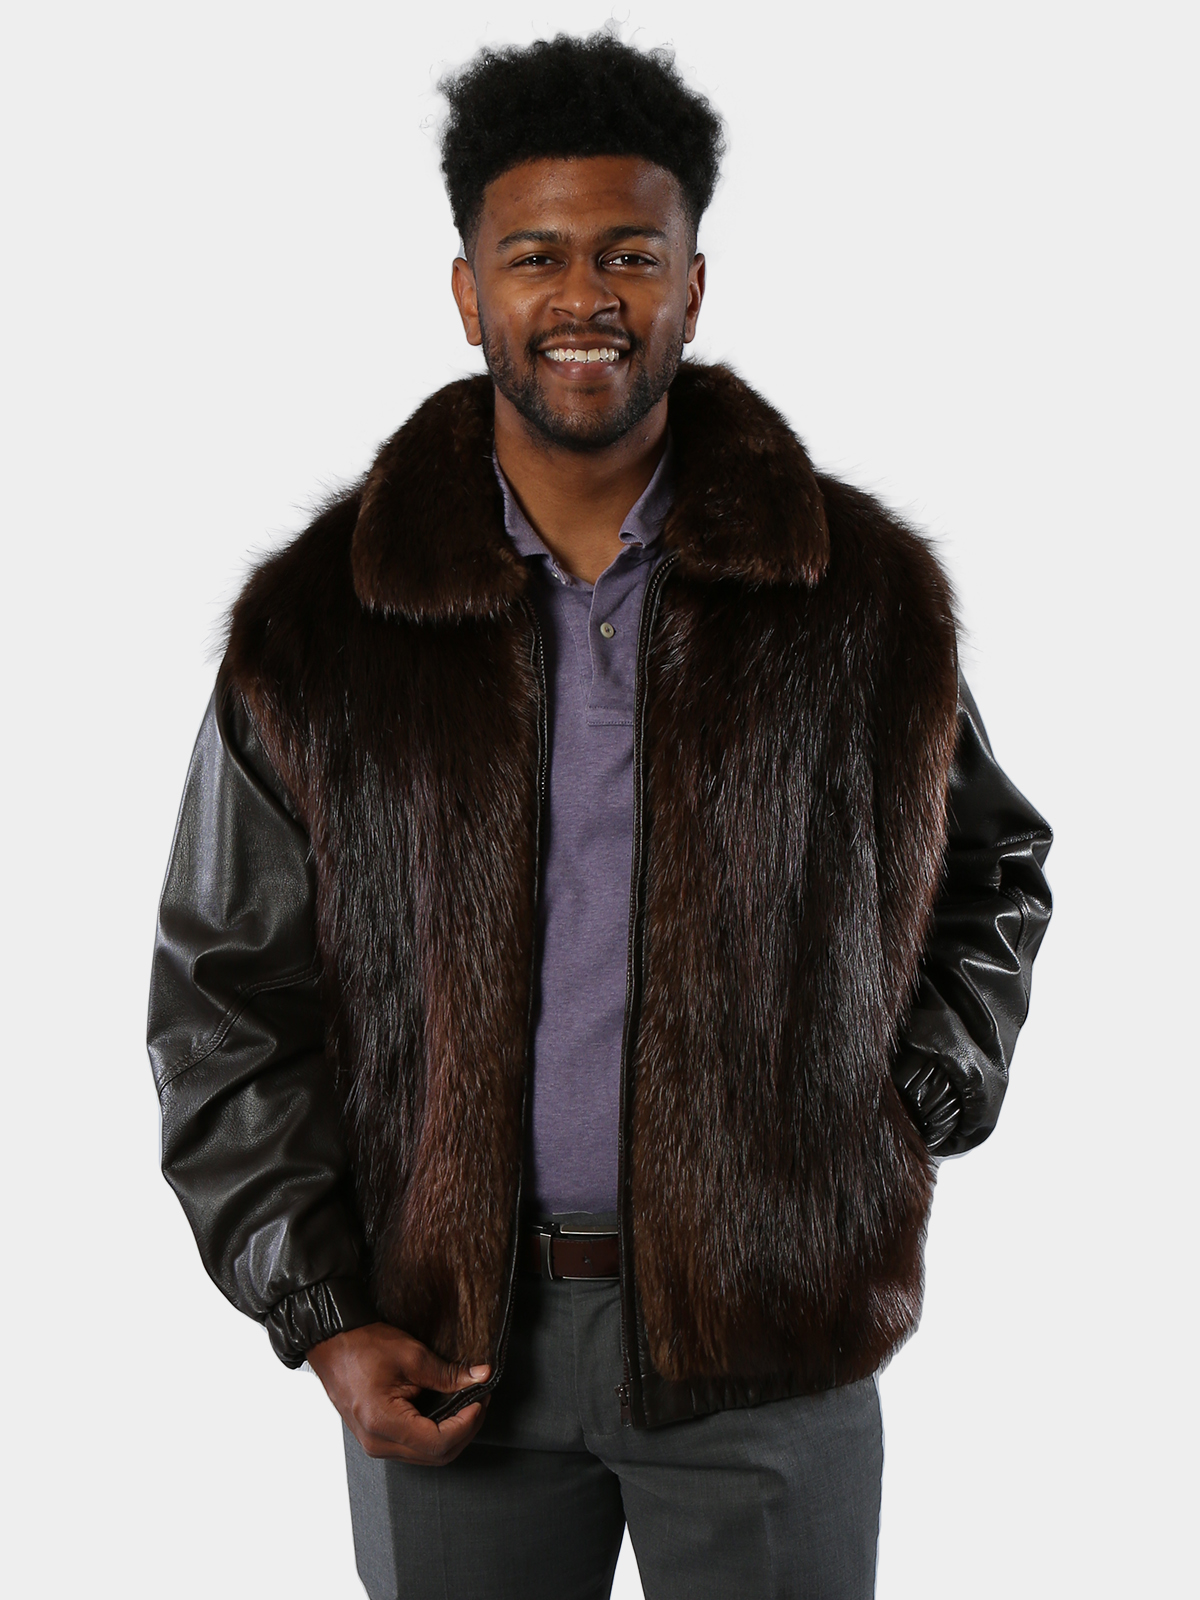 Man's Medium Tone Long Hair Beaver Fur Jacket with Zip Out Leather Sleeves